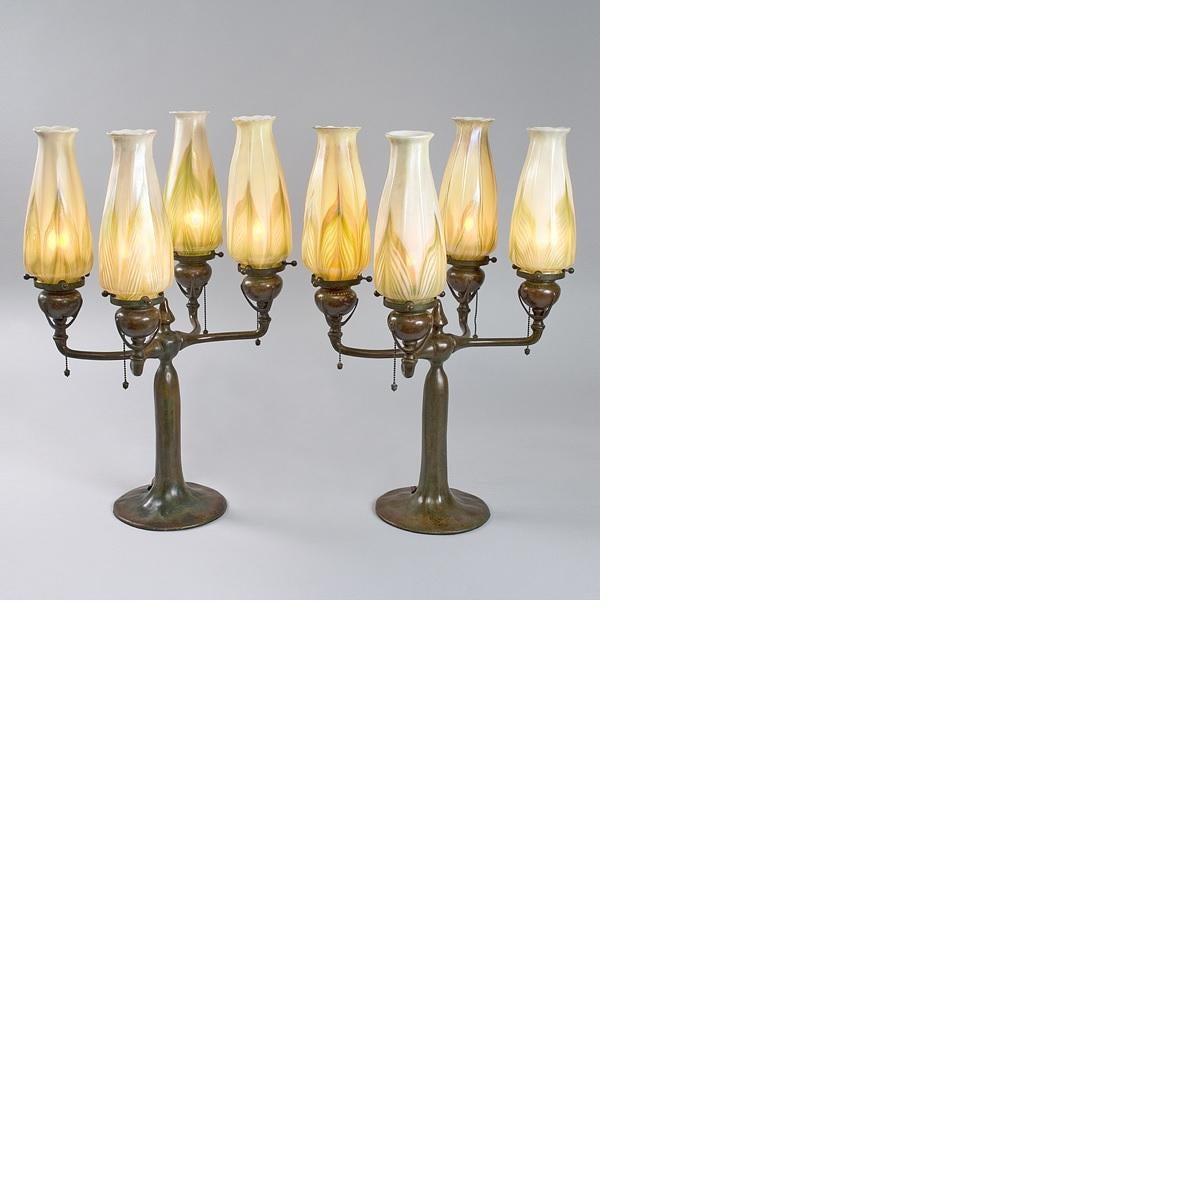 A pair of Tiffany Studios New York glass and bronze electrified candelabra, each one featuring; four iridescent white and green Favrile glass shades with a 